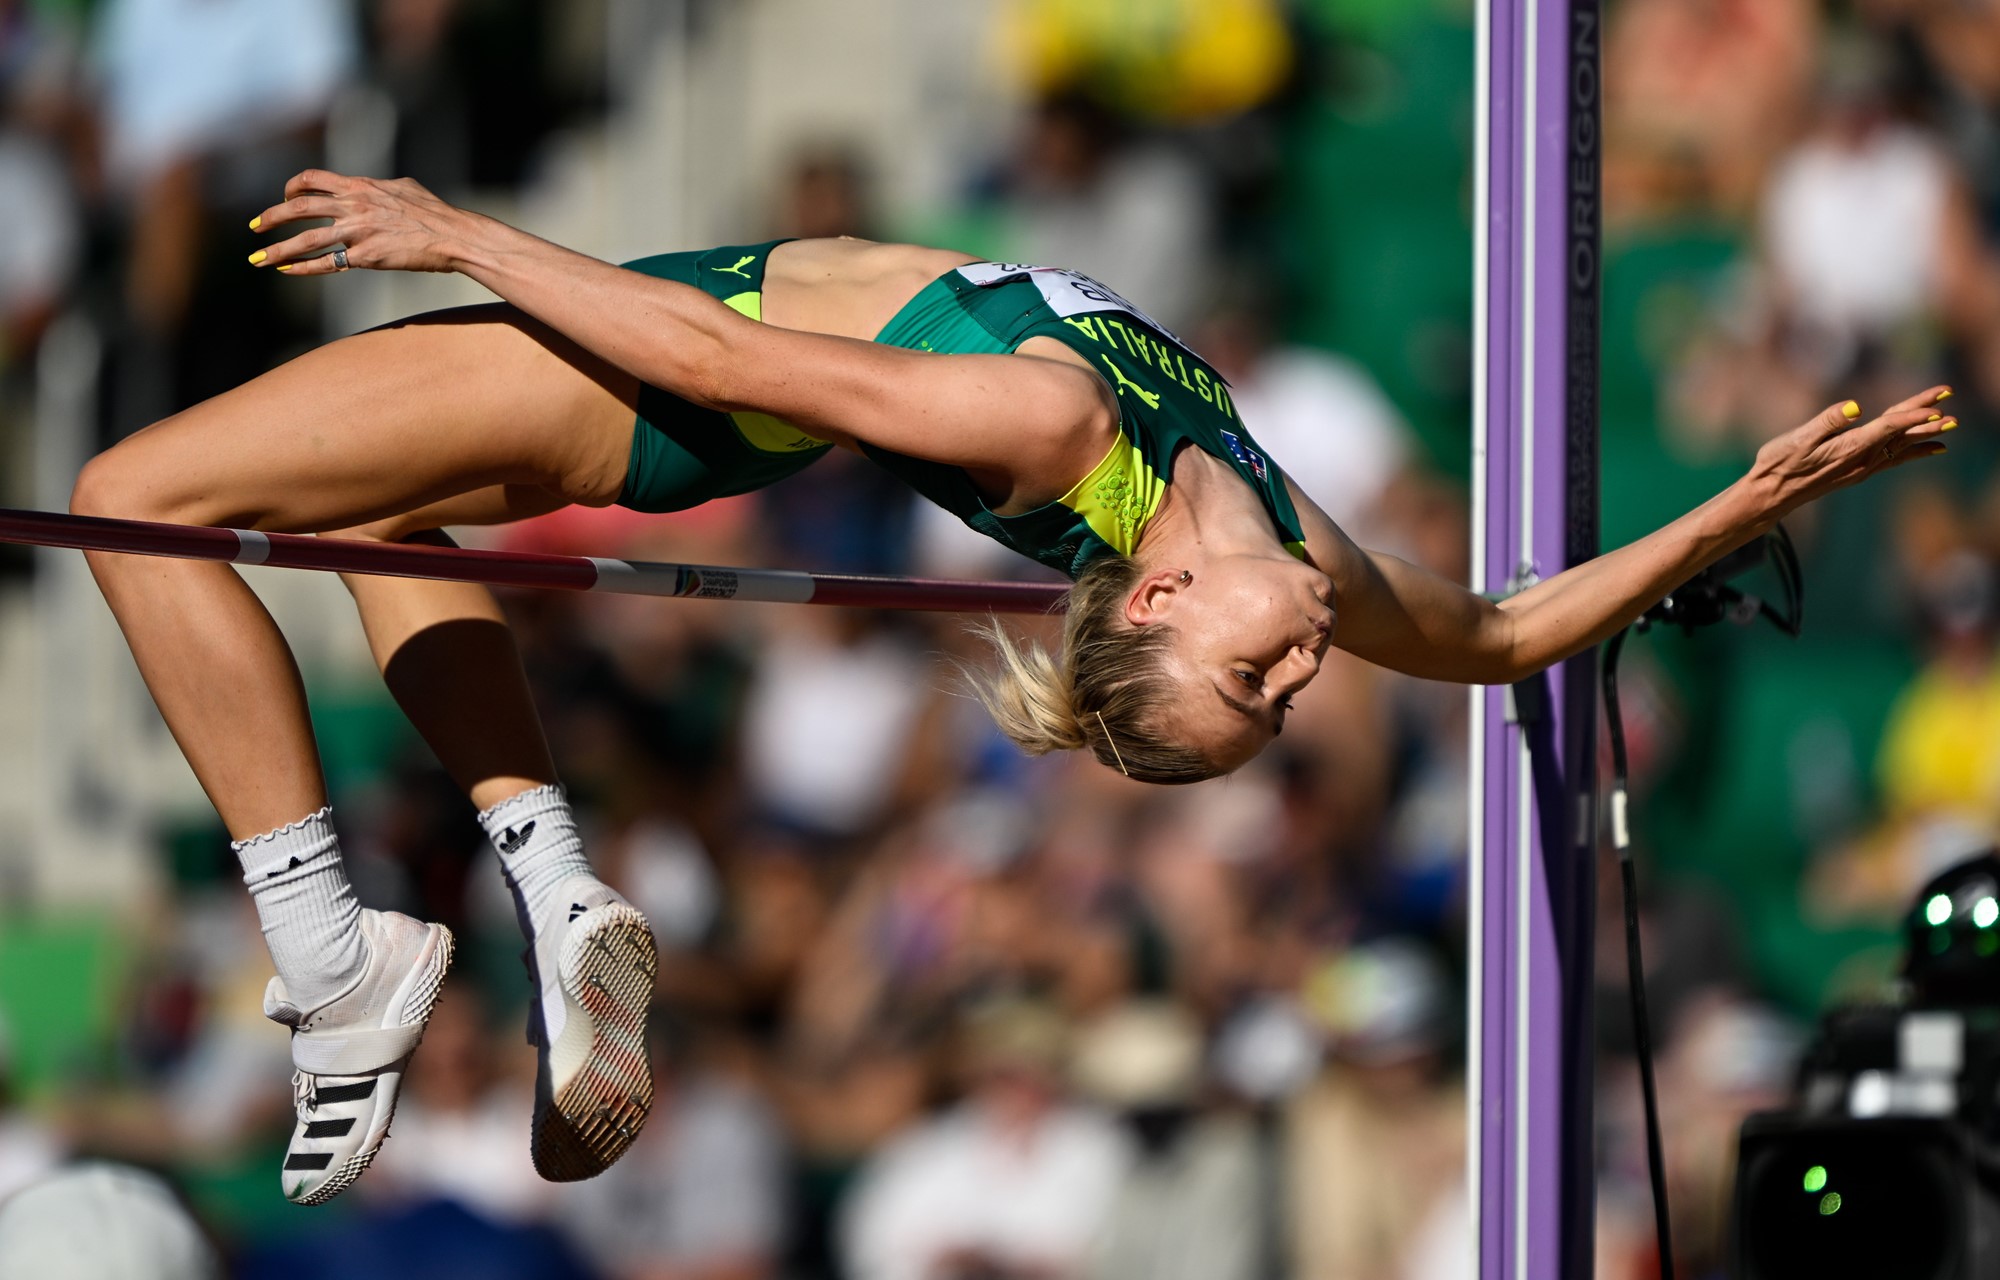 Eleanor Patterson goes over the bar head-first and upside down in the high jump final at the athletics world championships